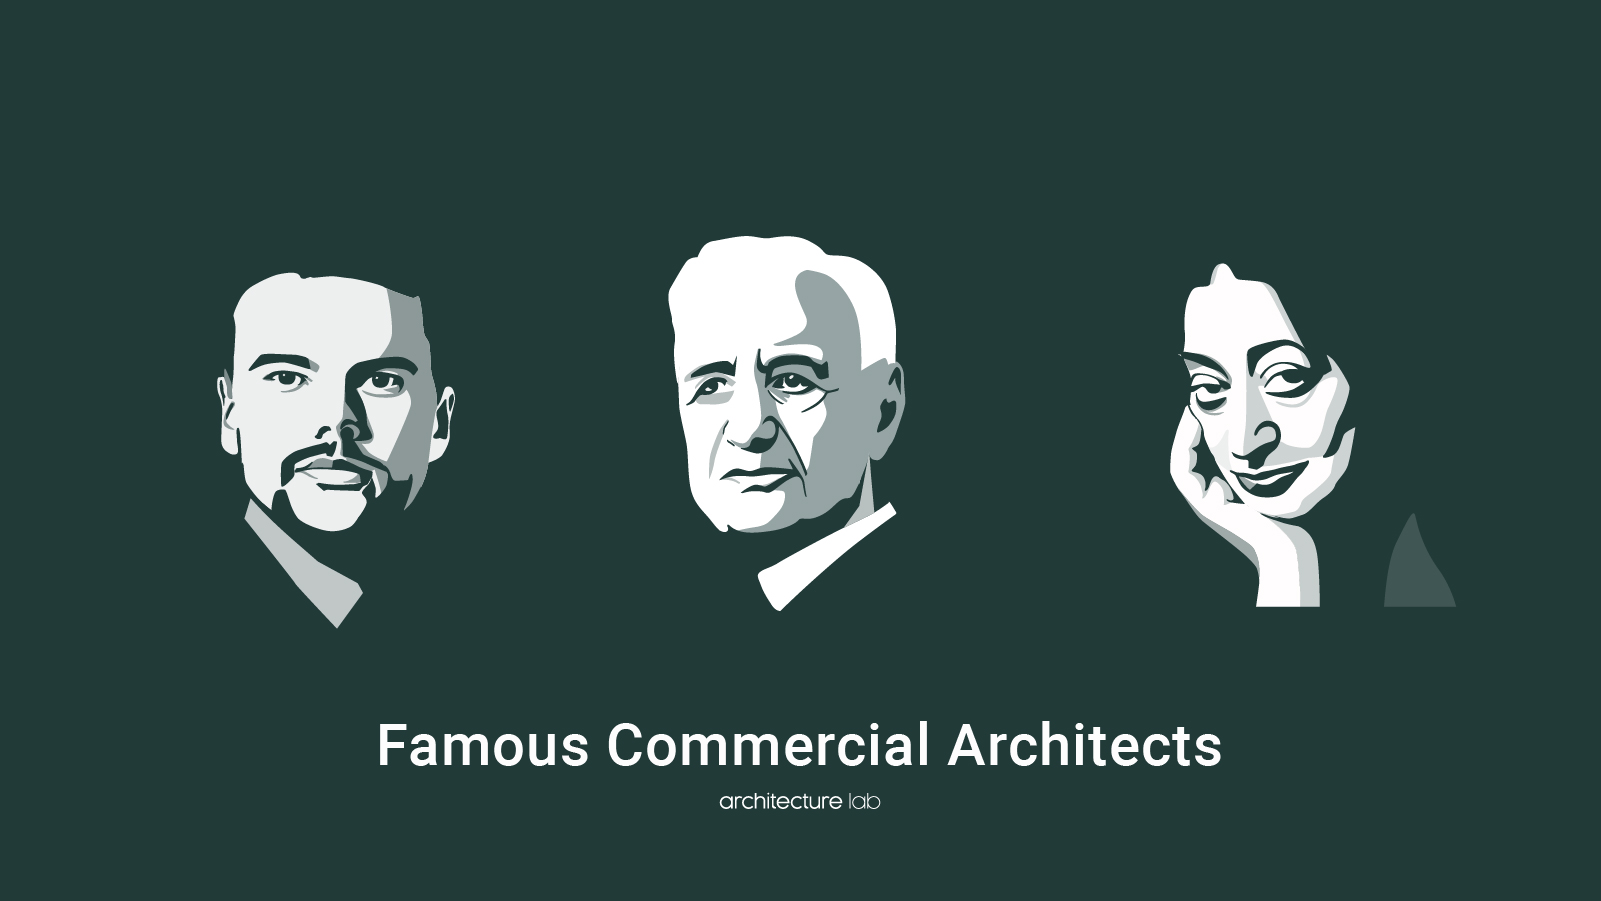 18 famous commercial architects and their proud works